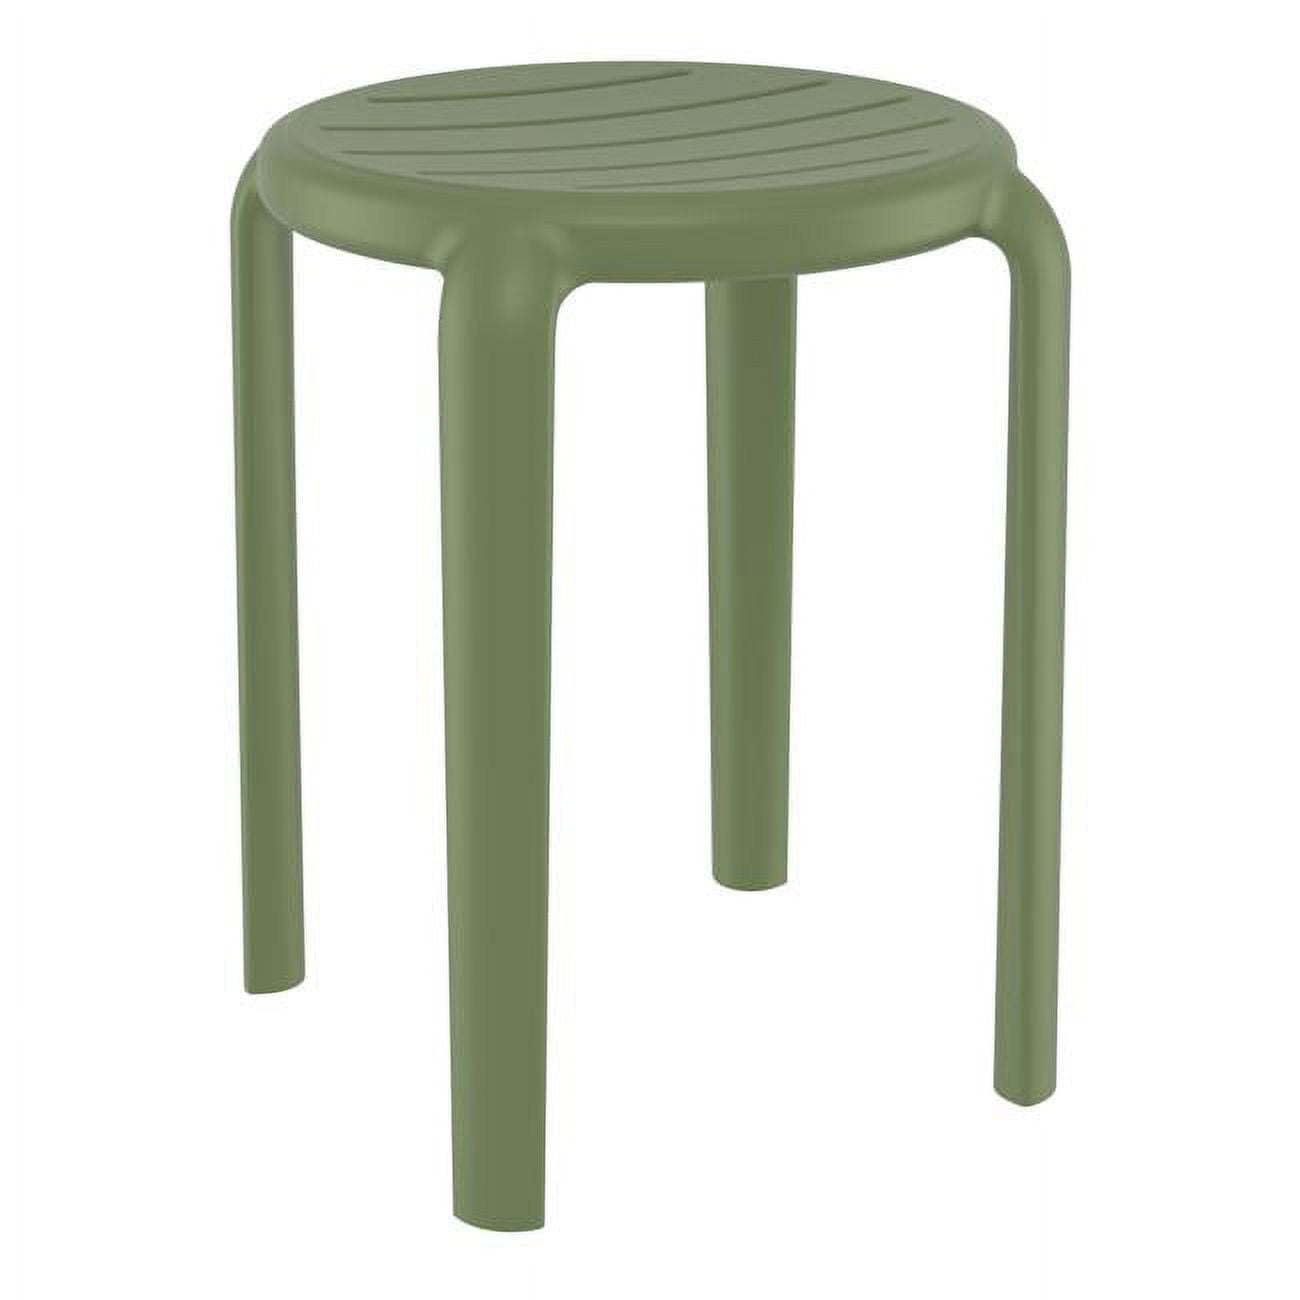 Picture of Siesta ISP286-OLG 17.7 x 13.3 x 13.3 in. Tom Resin Dining Stool - Olive Green - Pack of 2